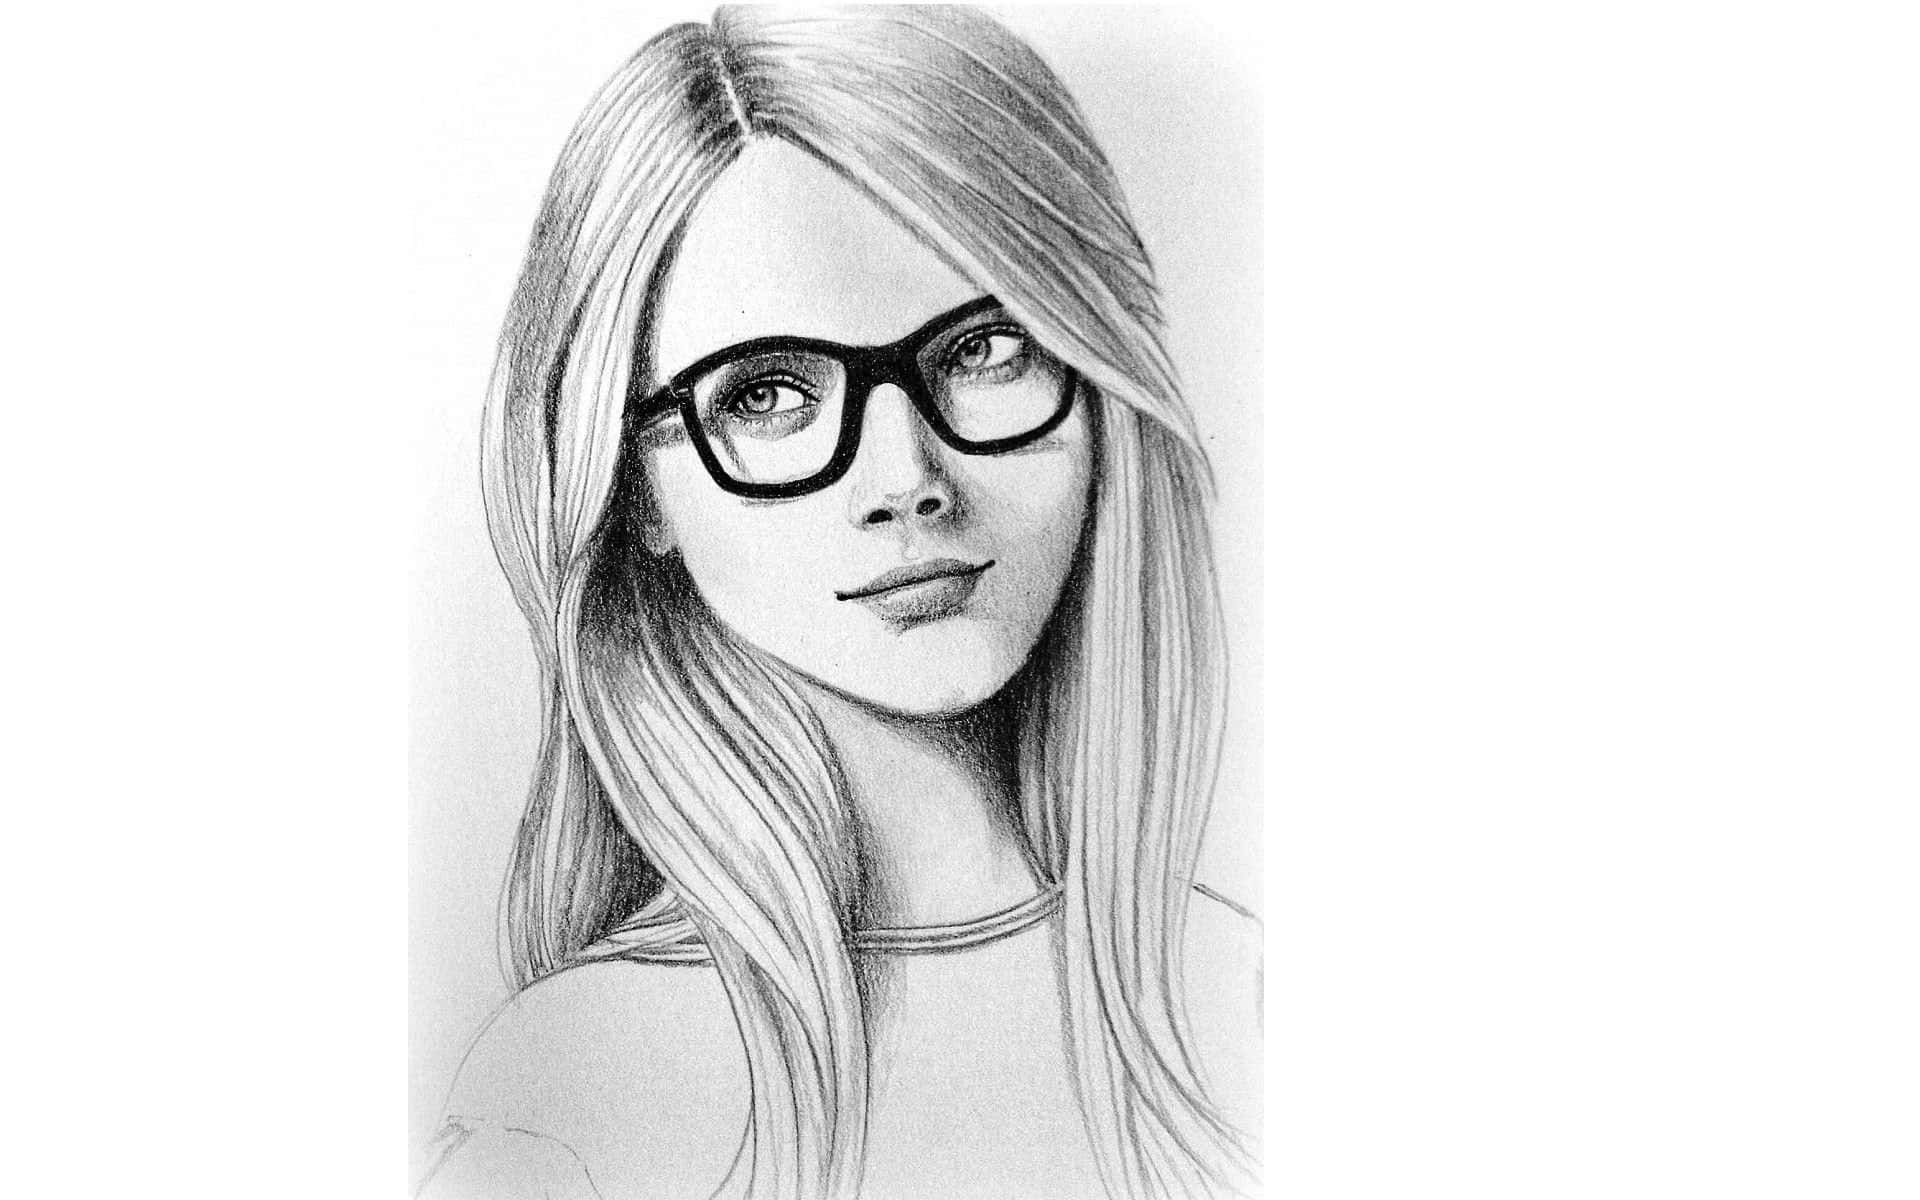 A Drawing Of A Woman With Glasses